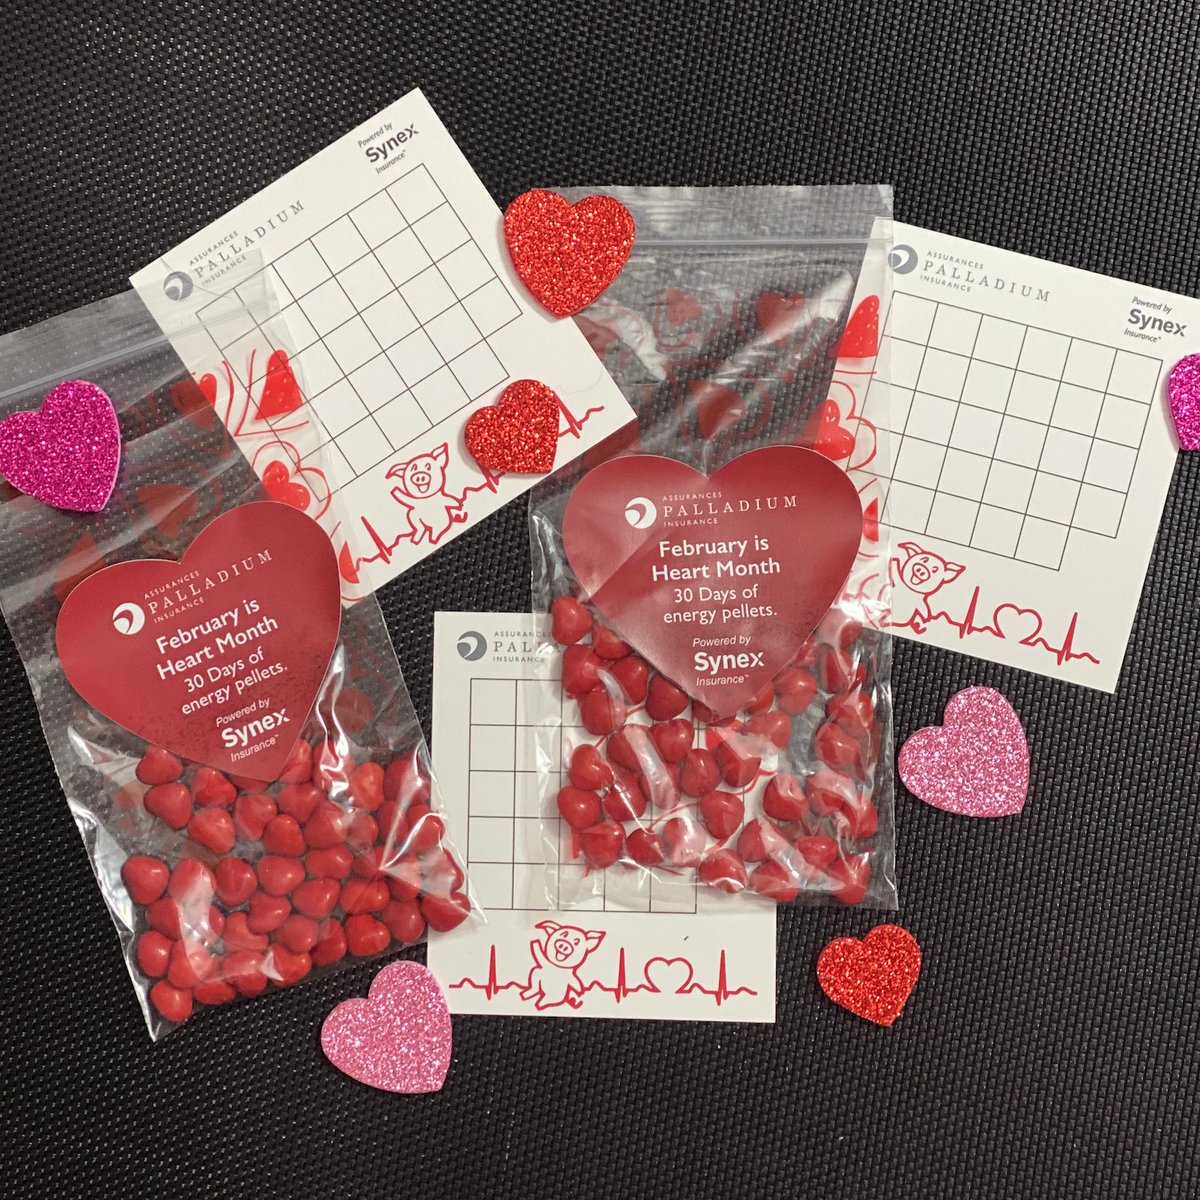 February is Heart Month! Our team's proud to support this cause with daily heart-healthy habits to raise money for the University of Ottawa @HeartInstitute! To support cardiac care, education, and research at the institute, donate to @HeartFDN: bit.ly/42d8710